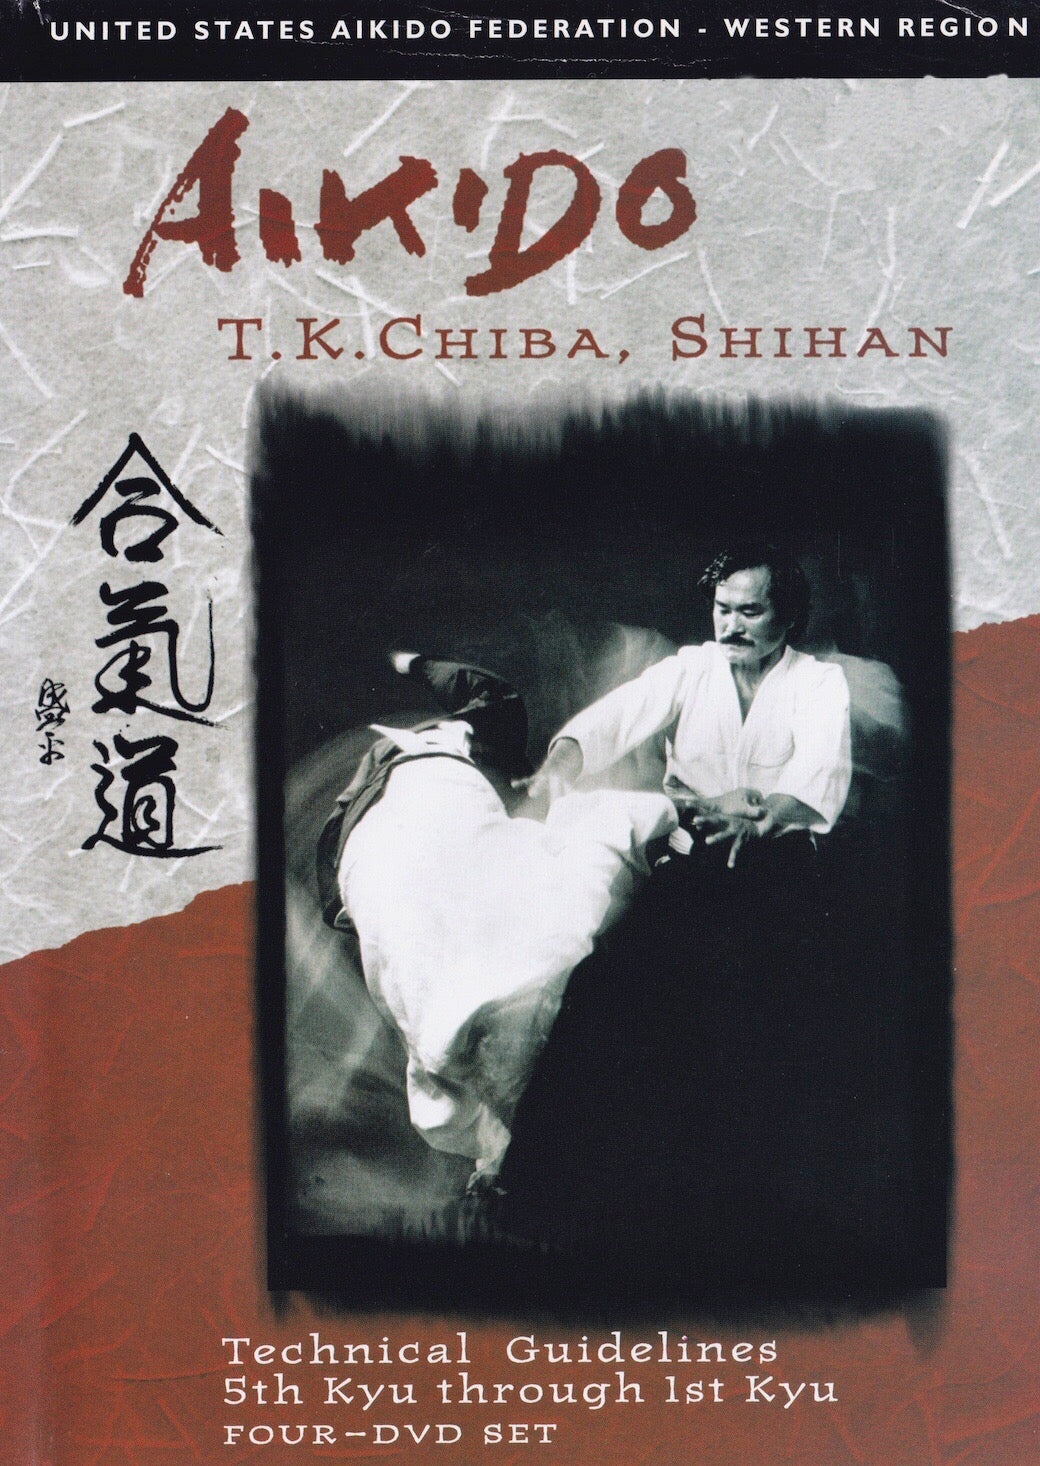 Aikido Technical Guidelines 4 DVD Set by TK Chiba  (Preowned) - Budovideos